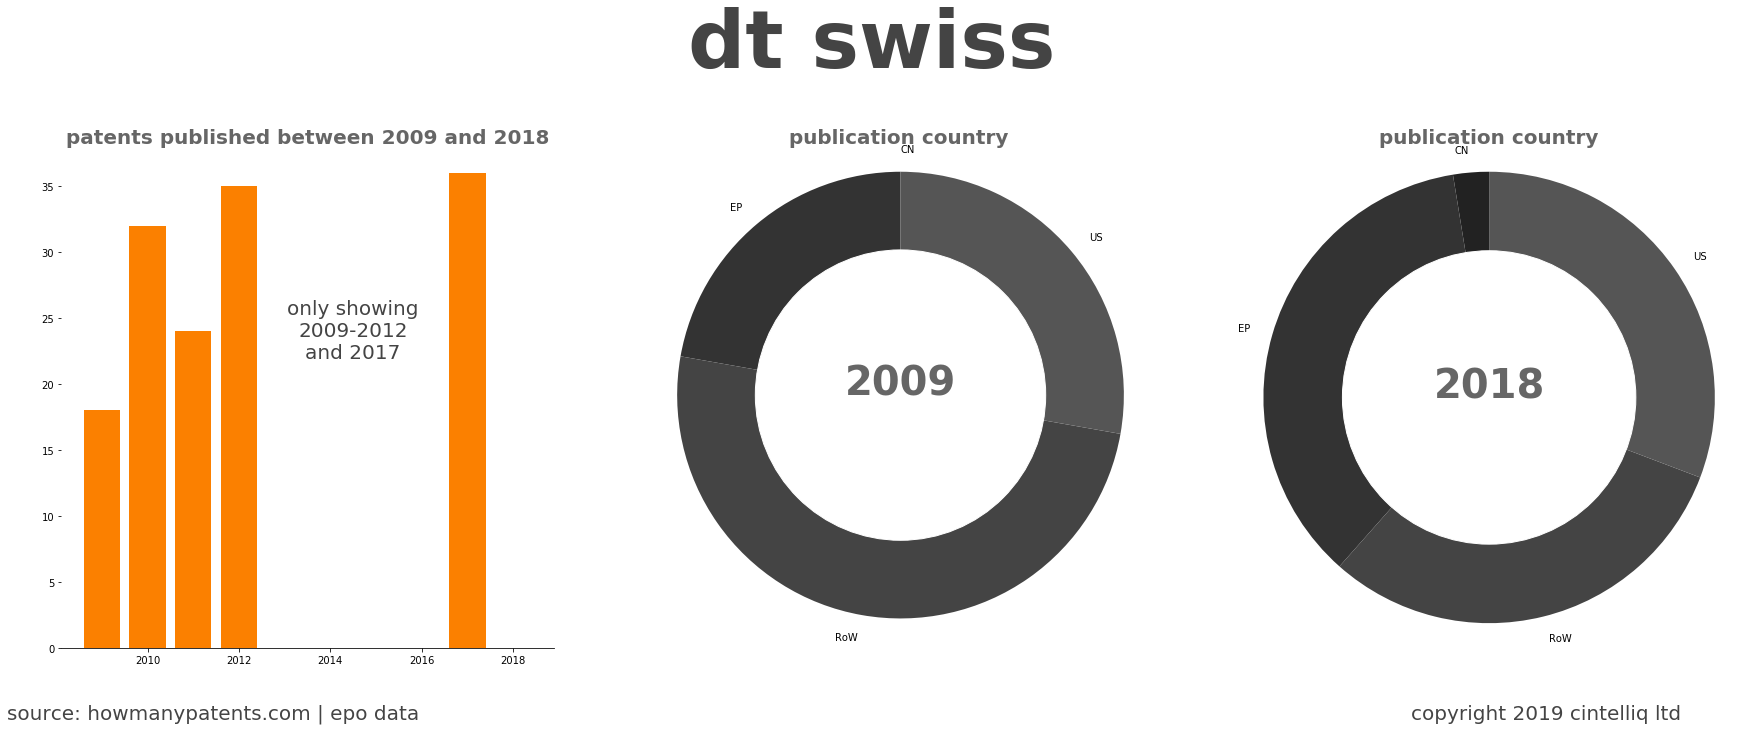 summary of patents for Dt Swiss